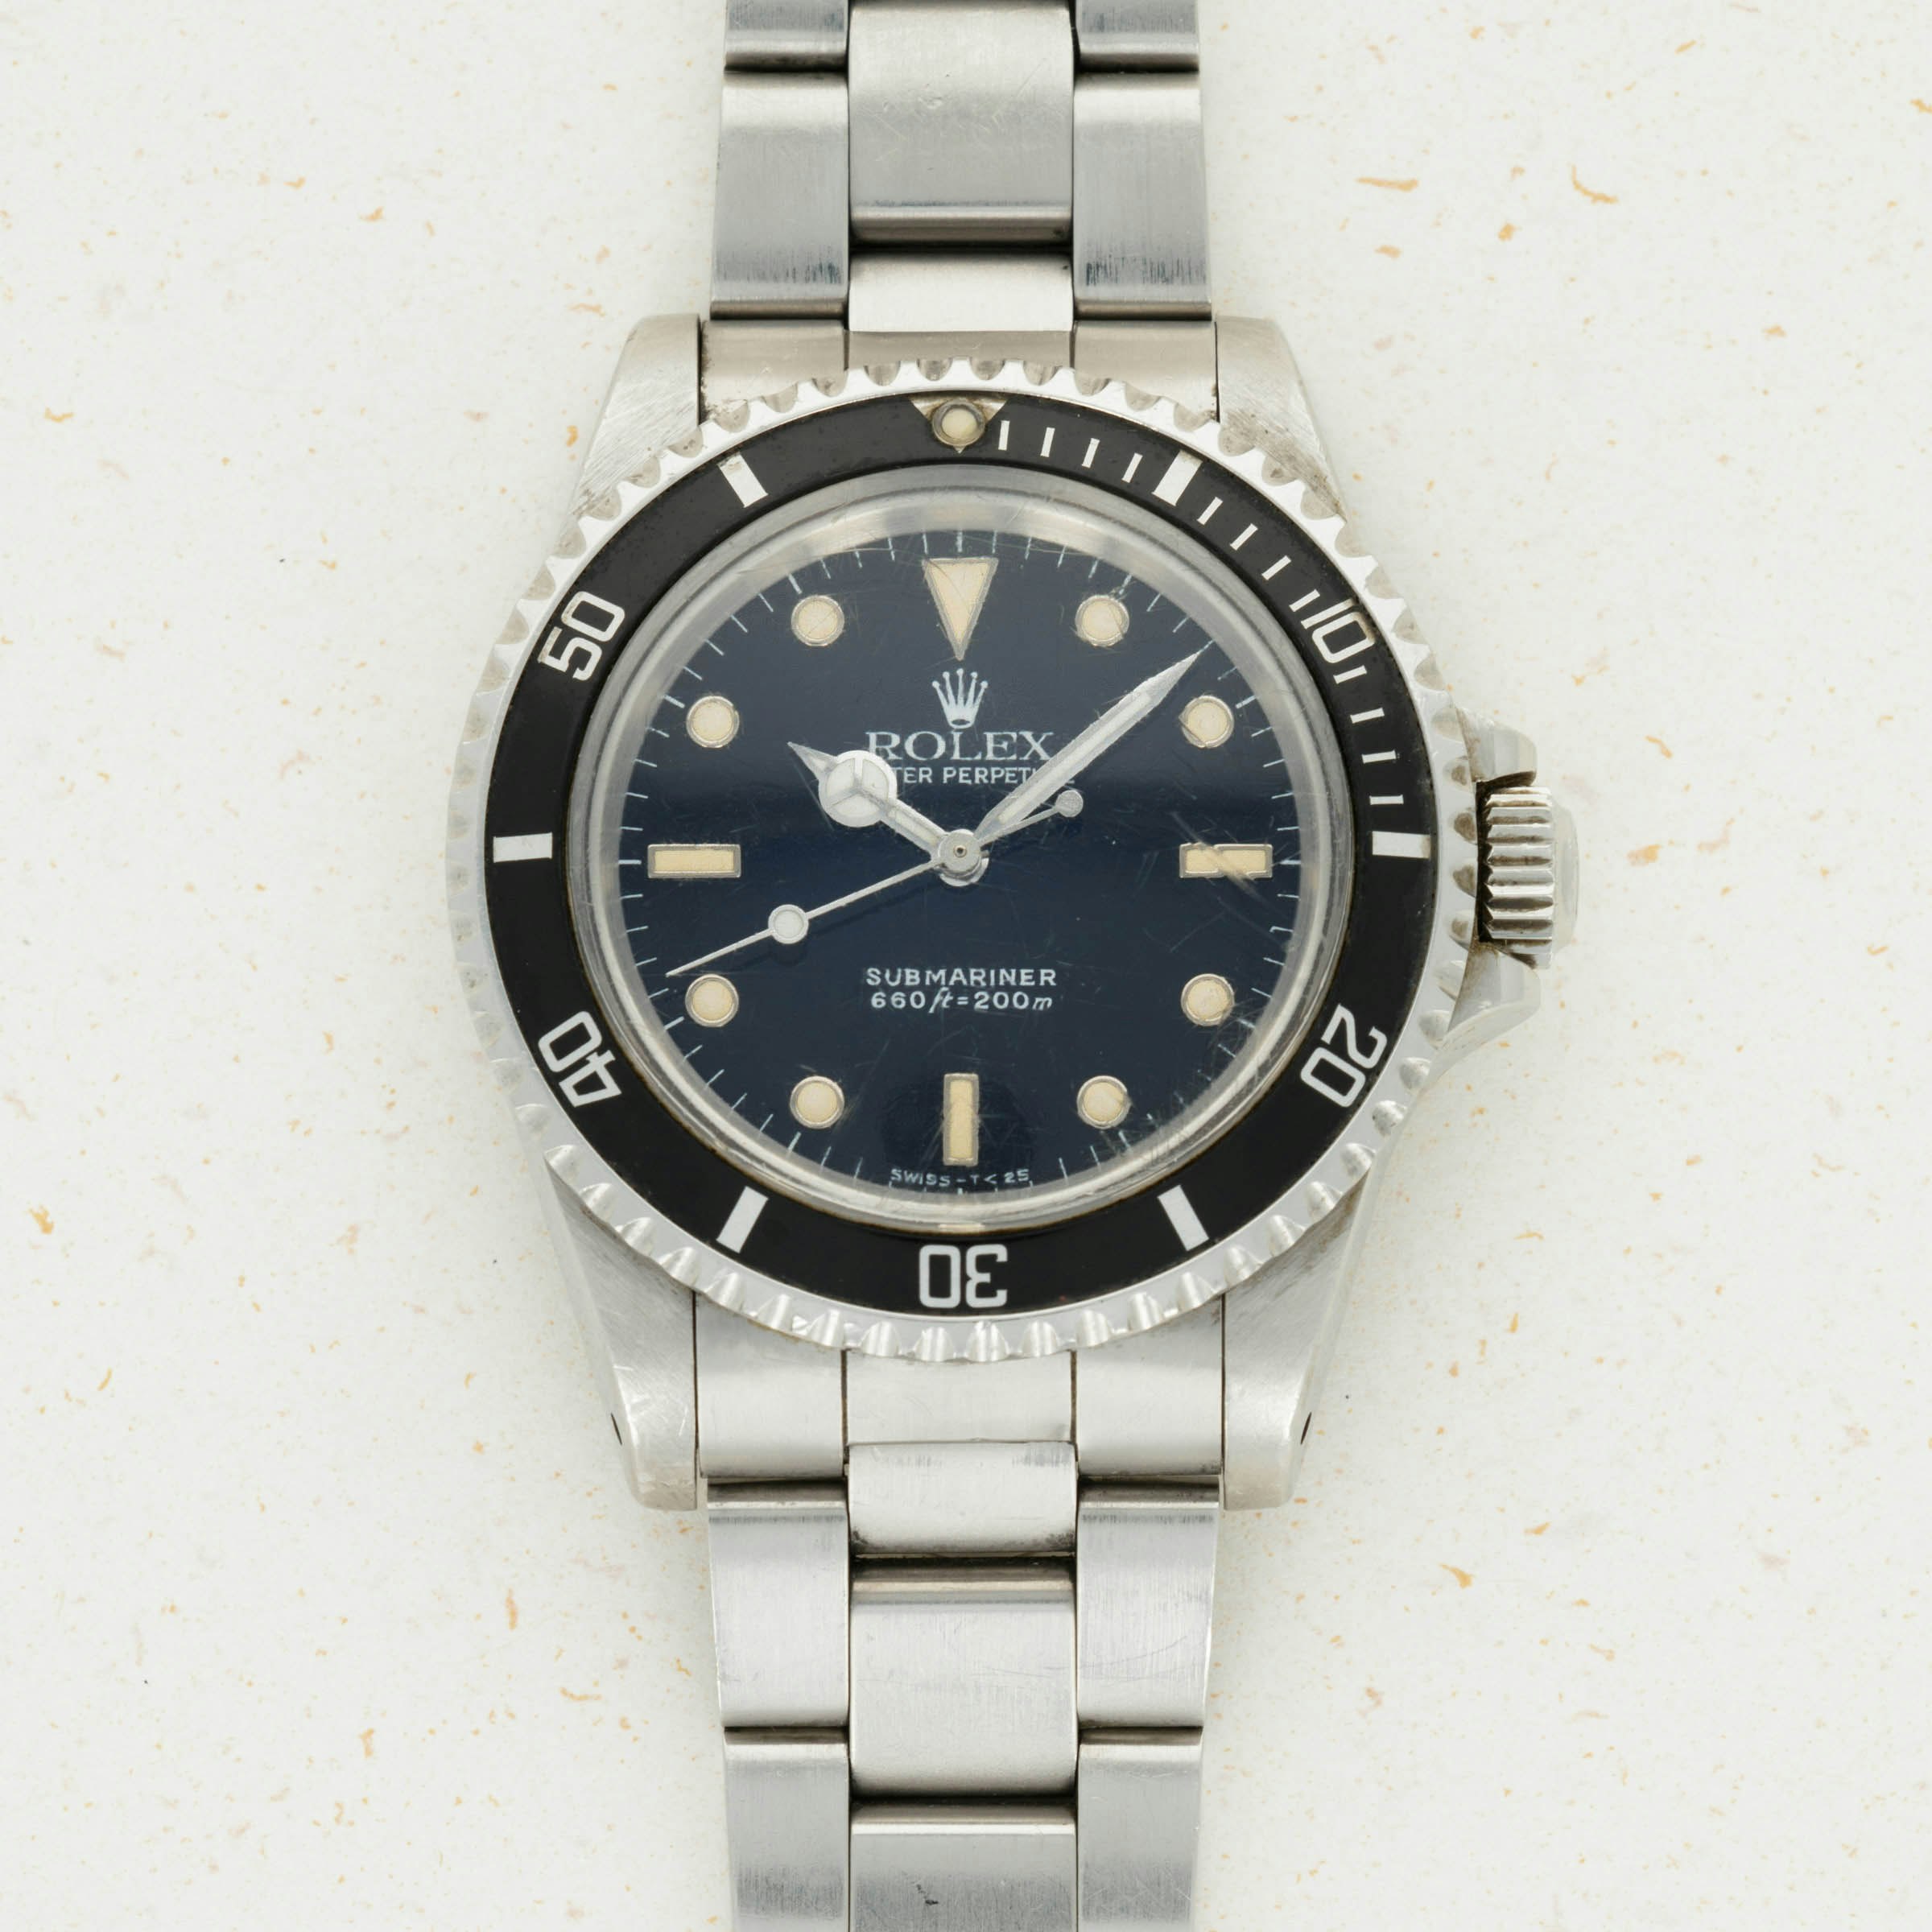 Thumbnail for Rolex Stainless Steel Submariner 5513 